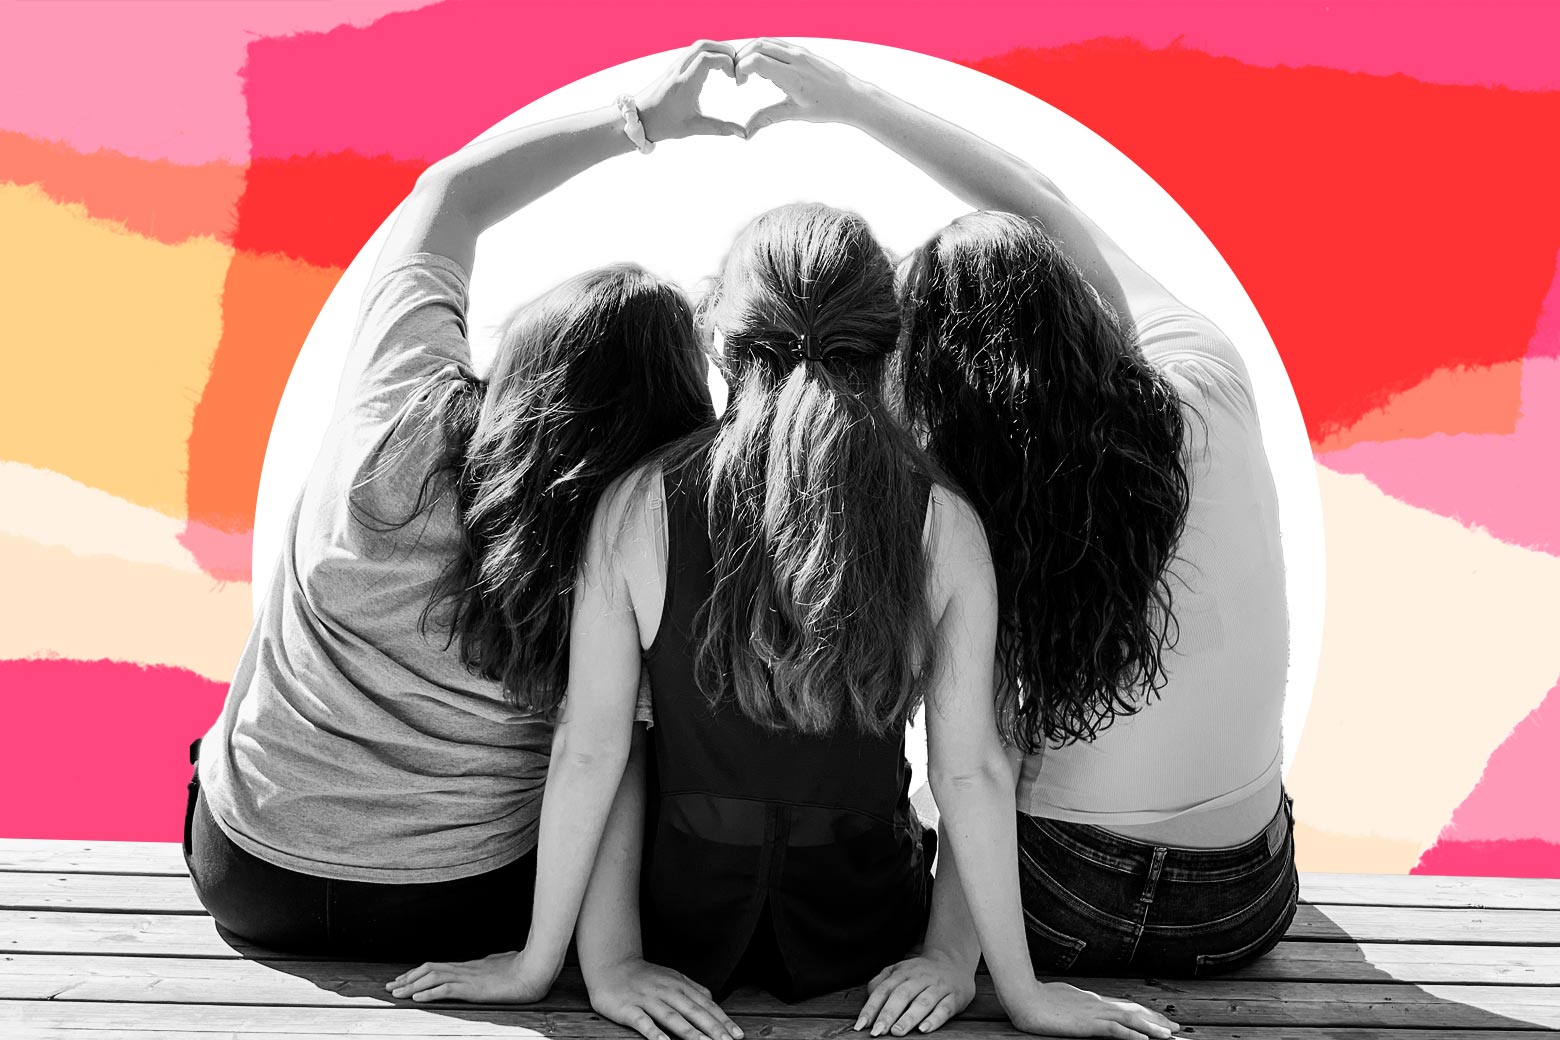 Three girls sit on a dock with the girls on the left and right making a heart with their hands